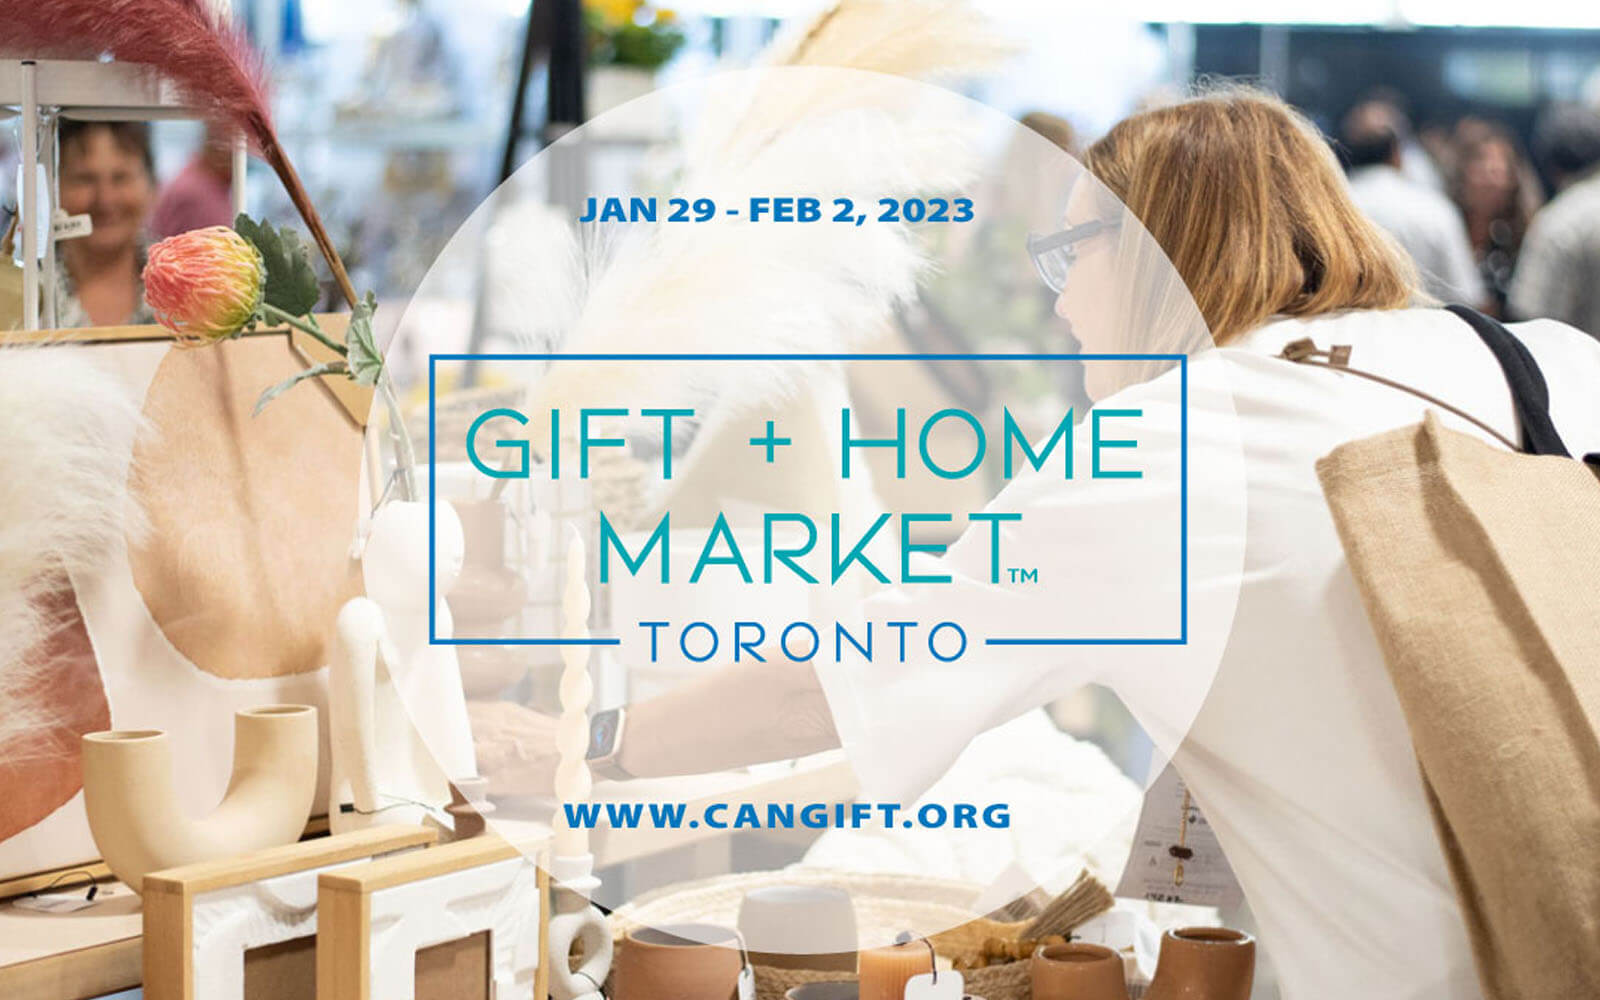 ARE YOU A RETAILER?  VISIT US @ THE TORONTO GIFT + HOME MARKET